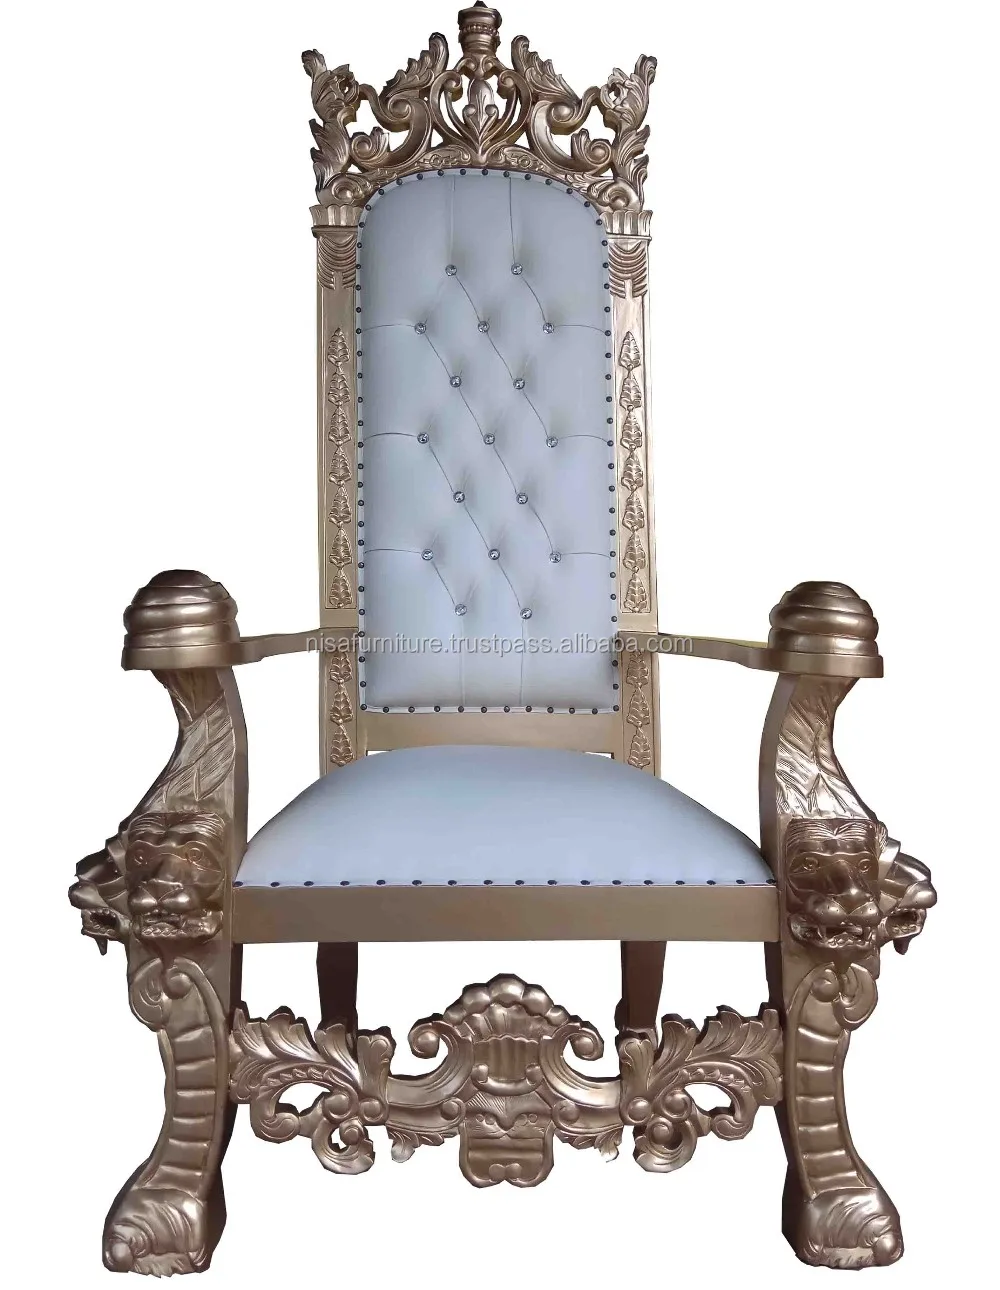 Carved Wood Mahogany King Lion Royal Throne Jepara Indonesia Living Room  Chairs - Buy Living Room Chairs,King Chair,King Throne Chair Product on  